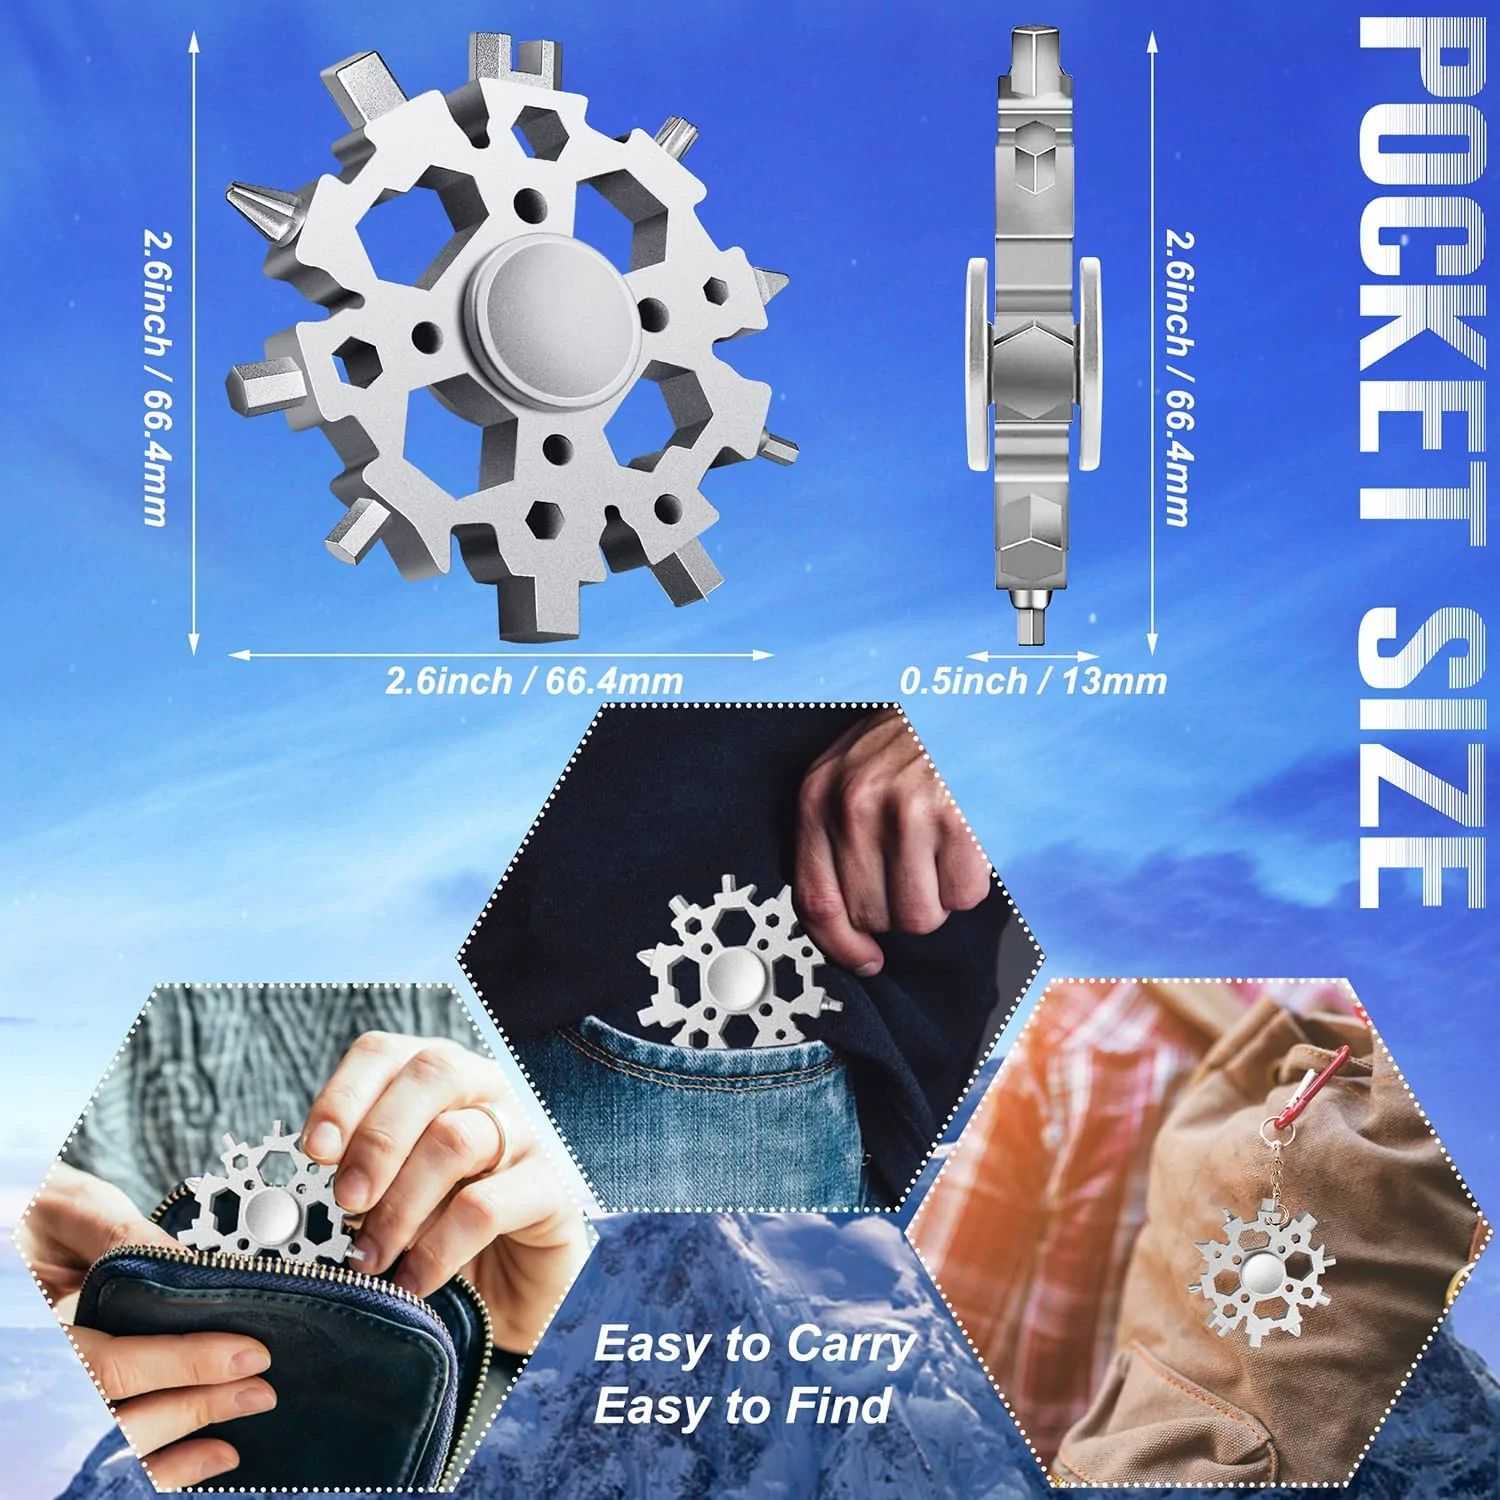 Stocking Stuffers for Adults Men, 2 Pack 18 in 1 Snowflake